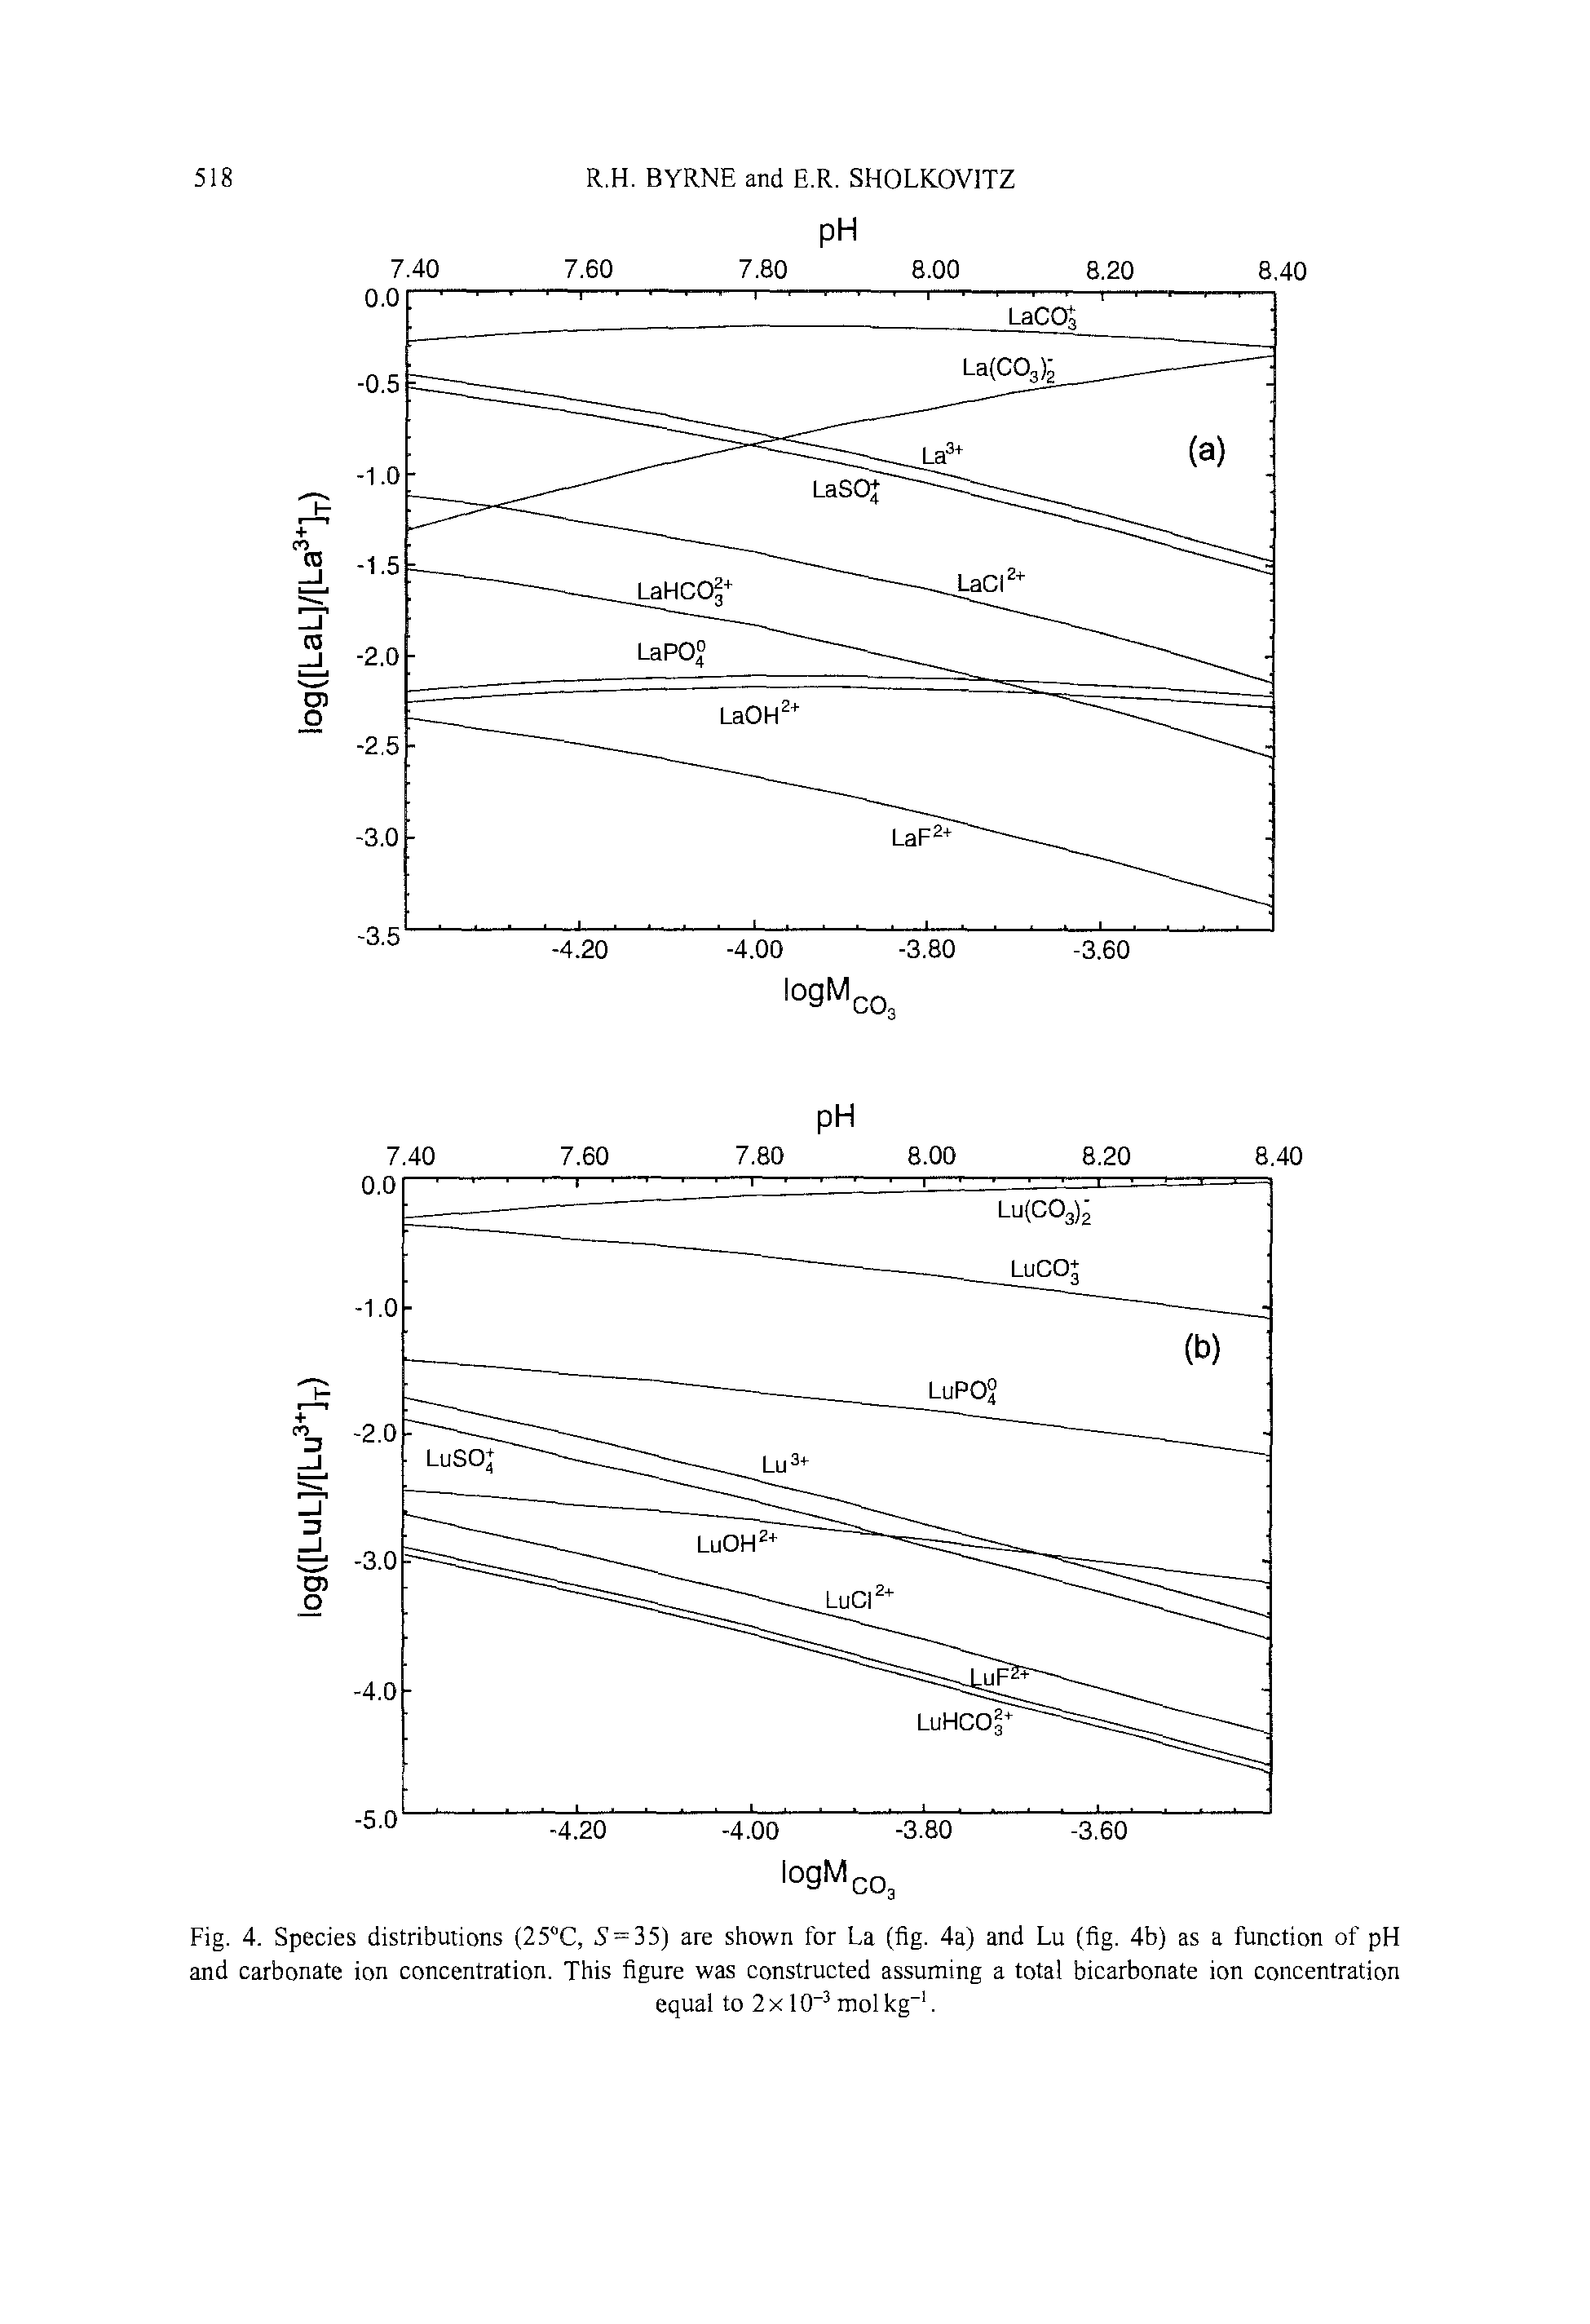 Fig. 4. Species distributions (25 C, Y = 35) are shown for La (fig. 4a) and Lu (fig. 4b) as a function of pH and carbonate ion concentration. This figure was constructed assuming a total bicarbonate ion concentration...